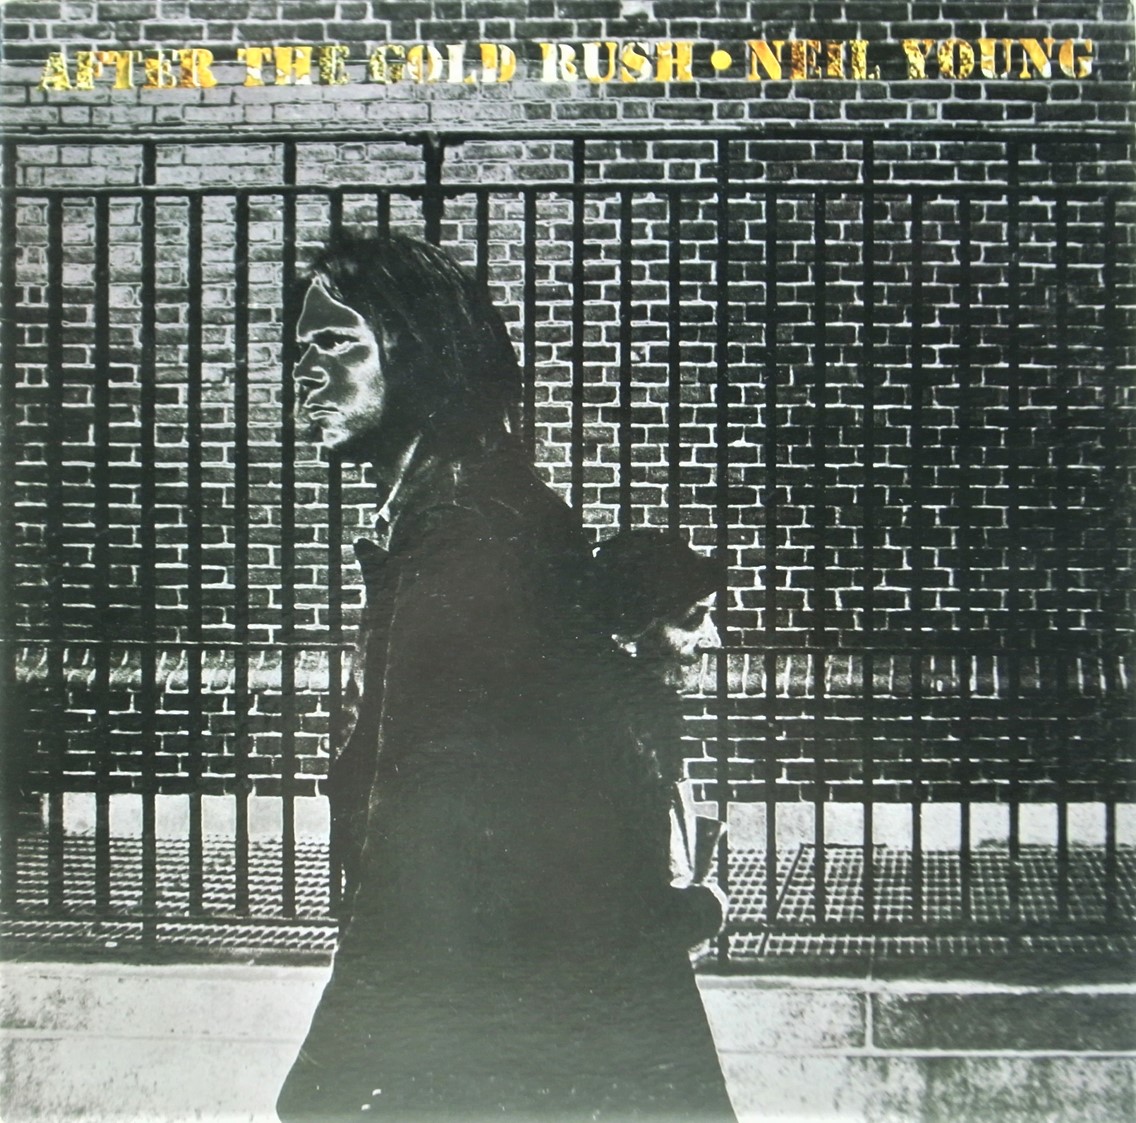 Neil Young / After The Gold Rush USオリジナル盤 | レコード買取